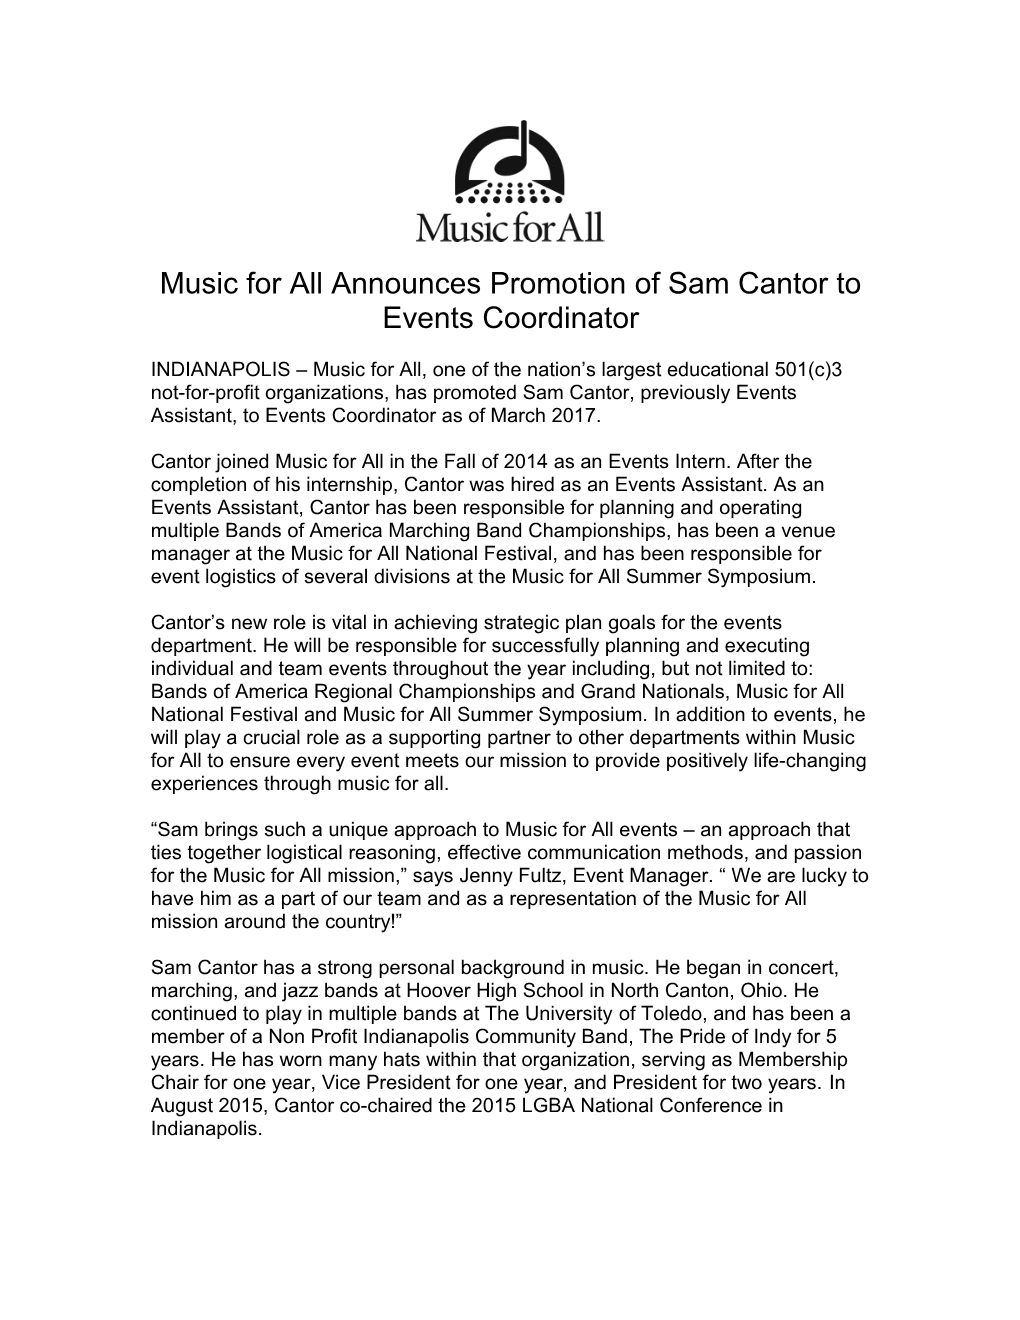 Music for All Announces Promotion of Sam Cantor to Events Coordinator